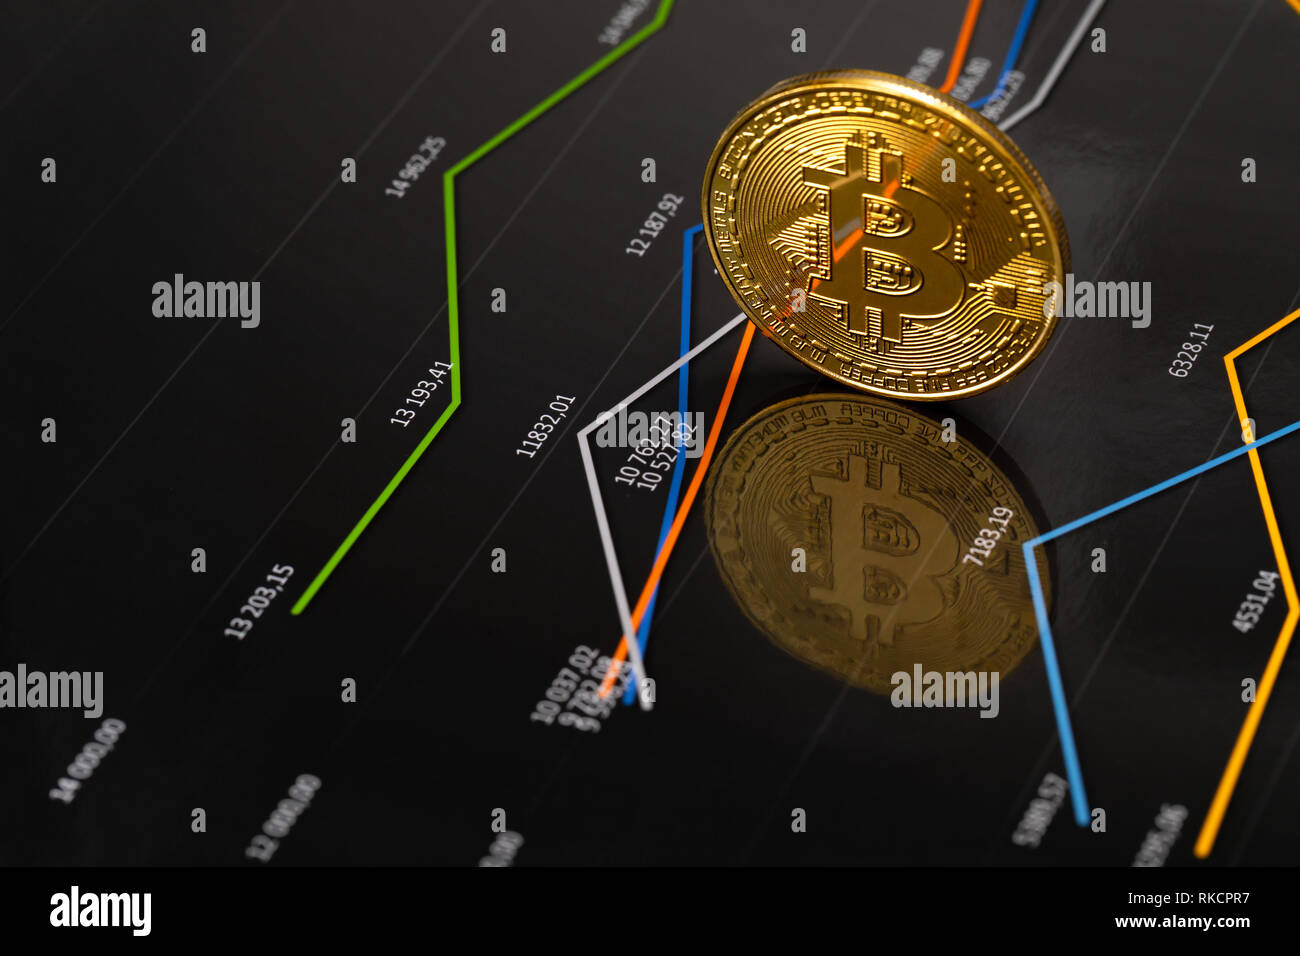 Gold bitcoin standing on financial charts for cryptocurrency prices Stock Photo